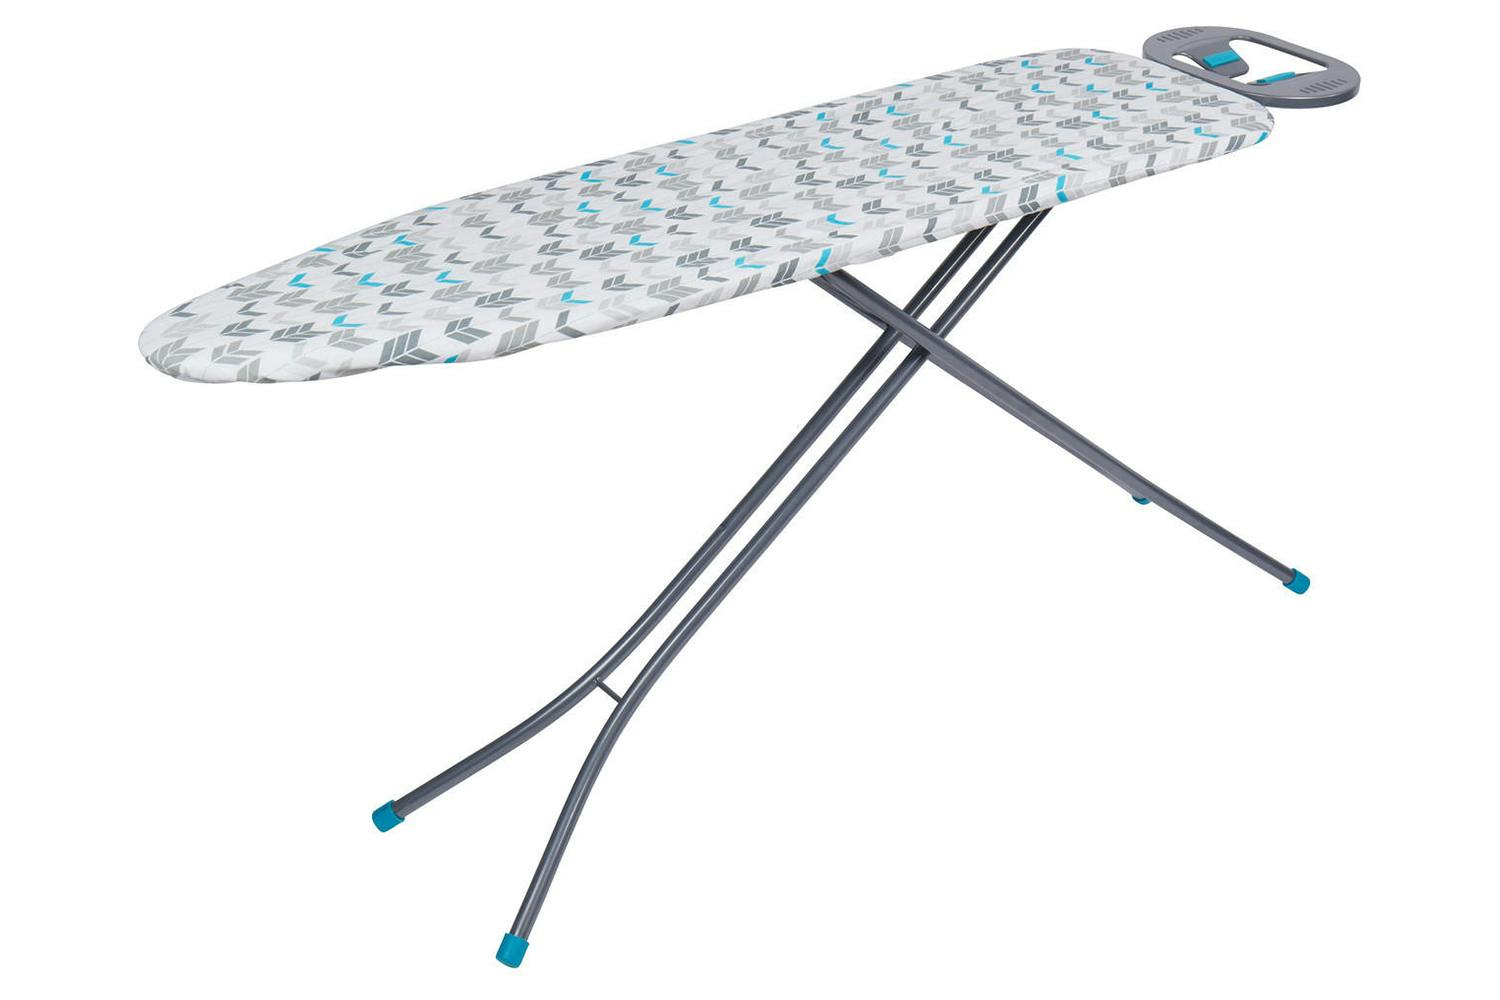 Beldray Adjustable Iron Rest, Lightweight Ironing Board | Grey and Turquoise